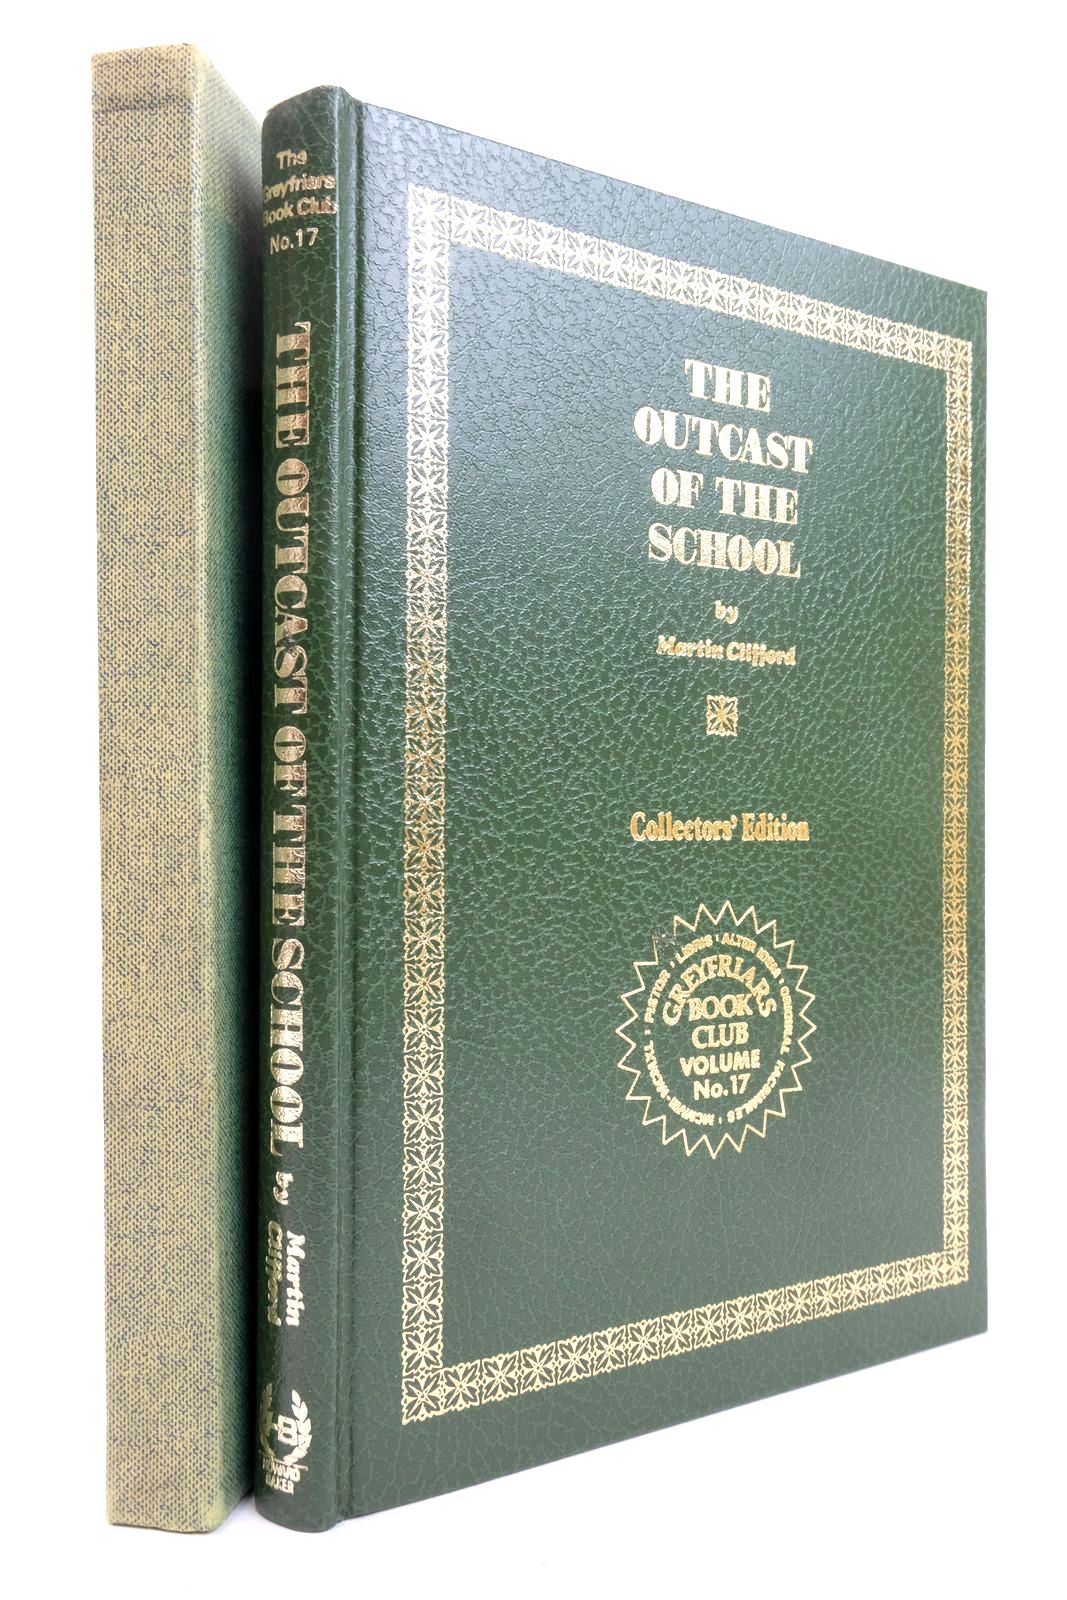 Photo of THE OUTCAST OF THE SCHOOL written by Richards, Frank
Clifford, Martin published by Howard Baker Press (STOCK CODE: 2136630)  for sale by Stella & Rose's Books